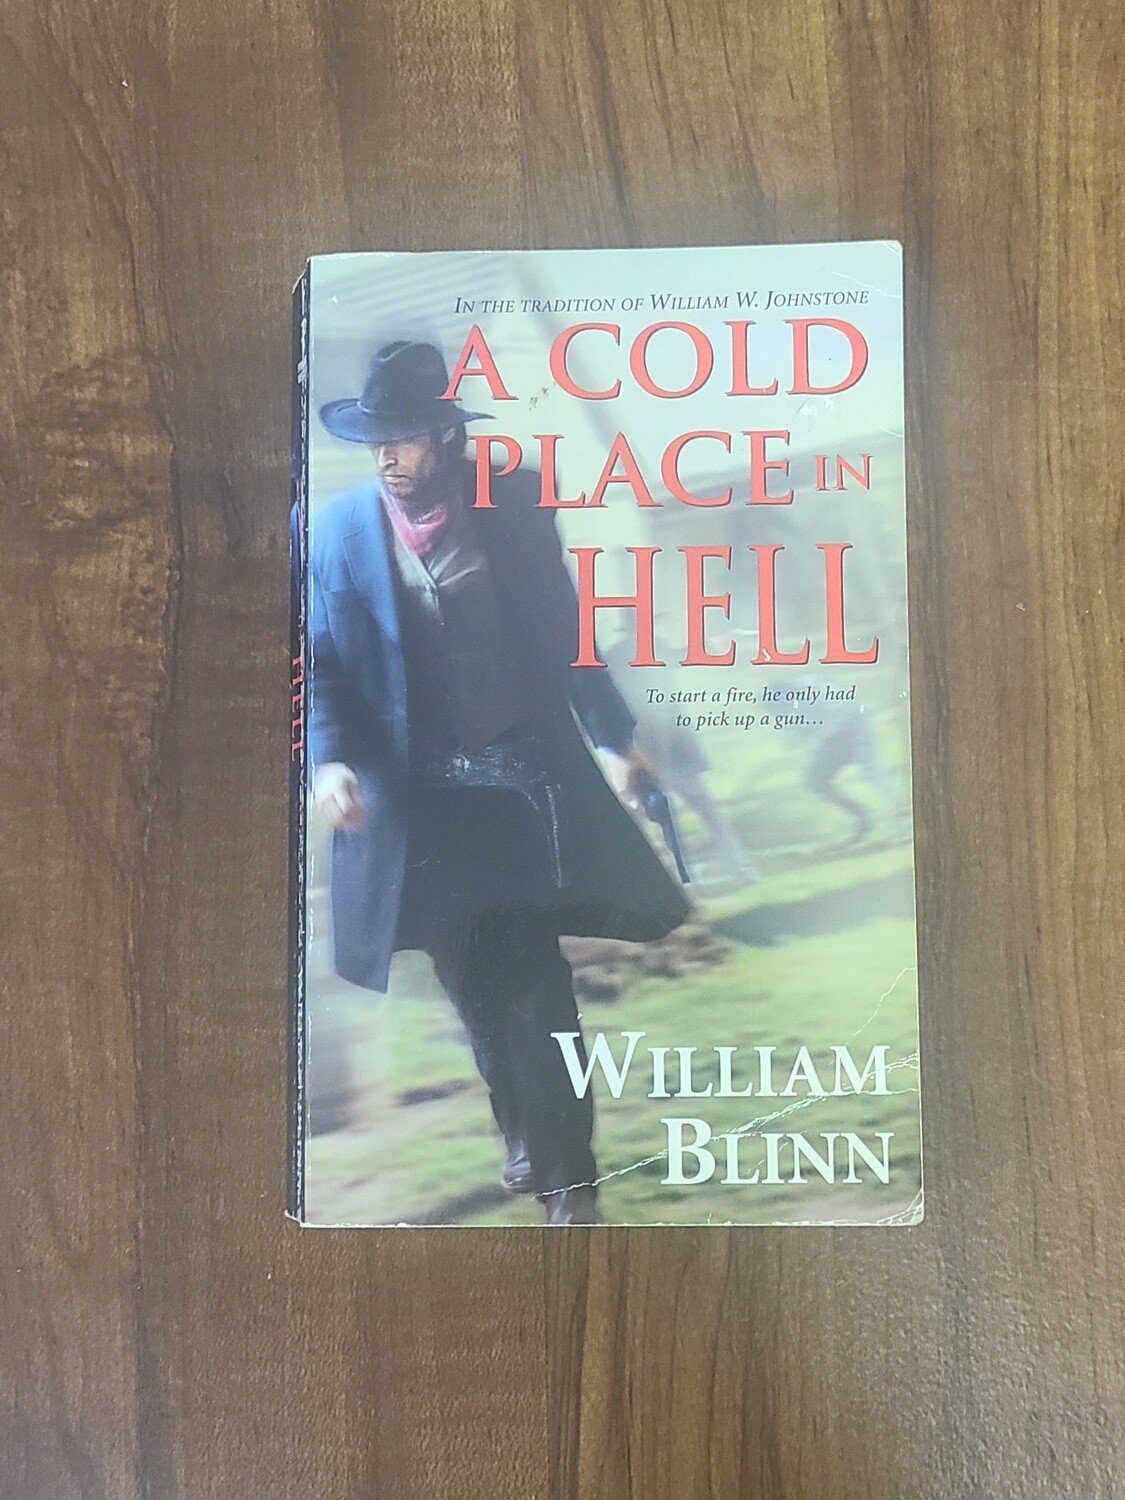 A Cold Place in Hell by William Blinn